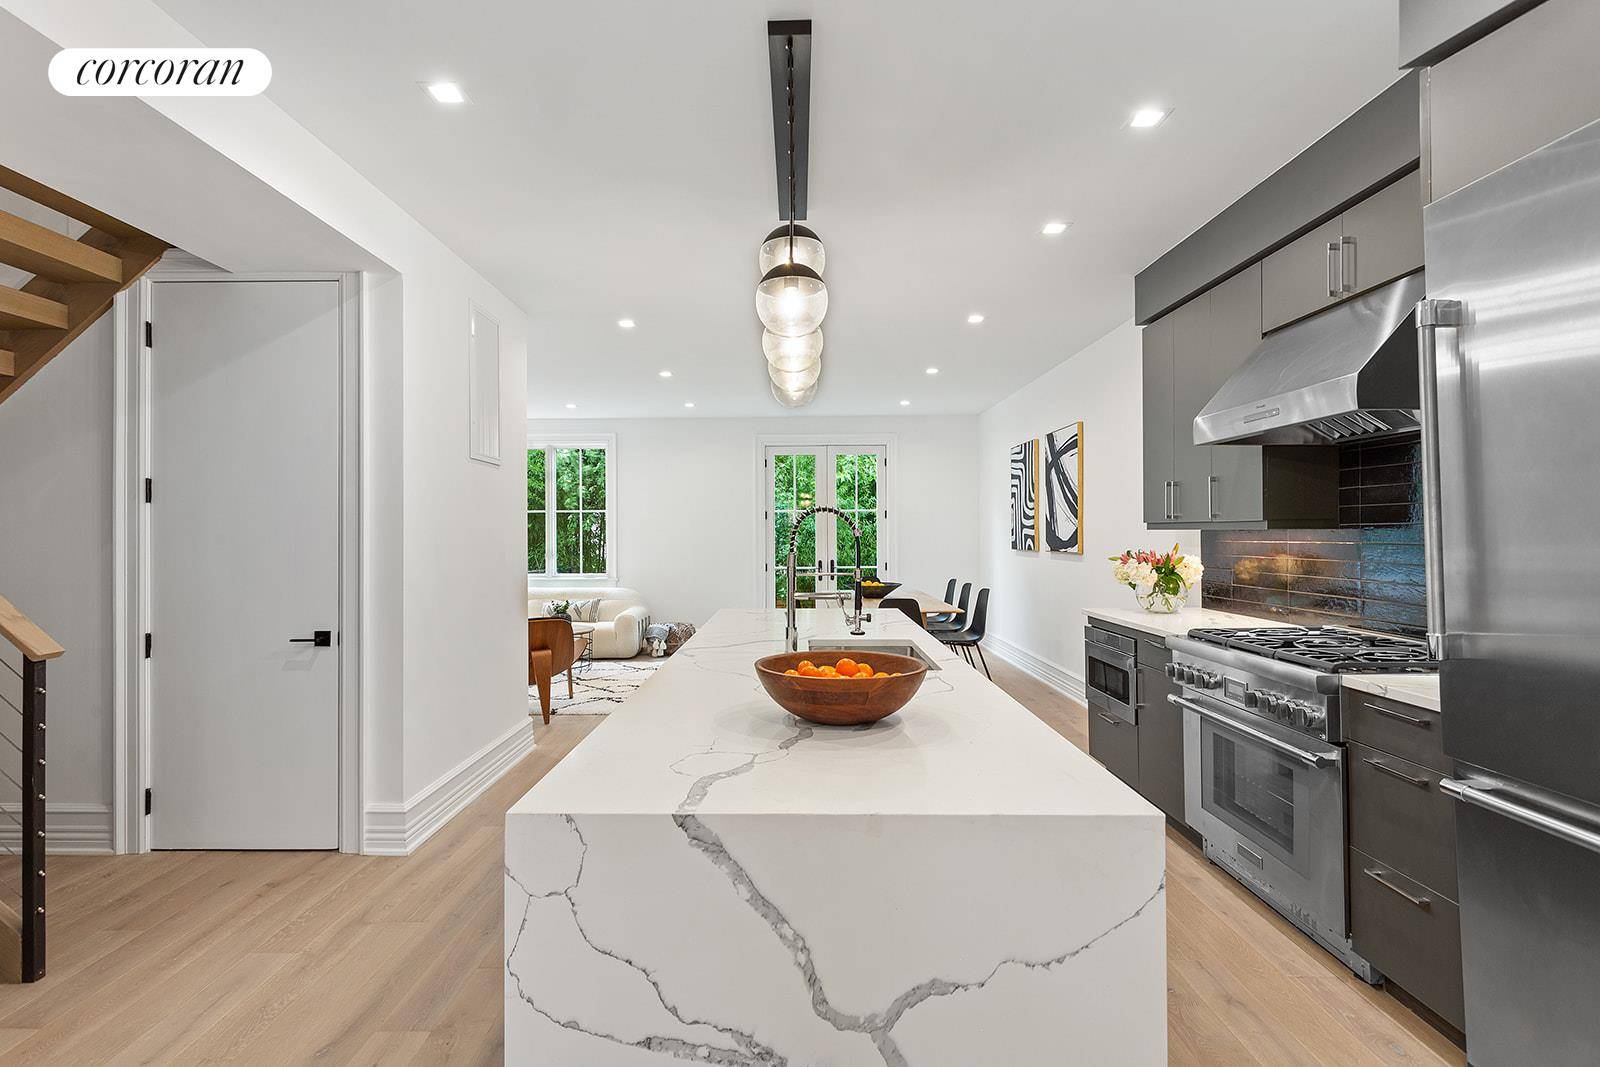 Welcome to 108 King Street, a pair of new construction duplex condominiums offering a quintessential brownstone experience on one of Red Hook's most desirable tree lined blocks.